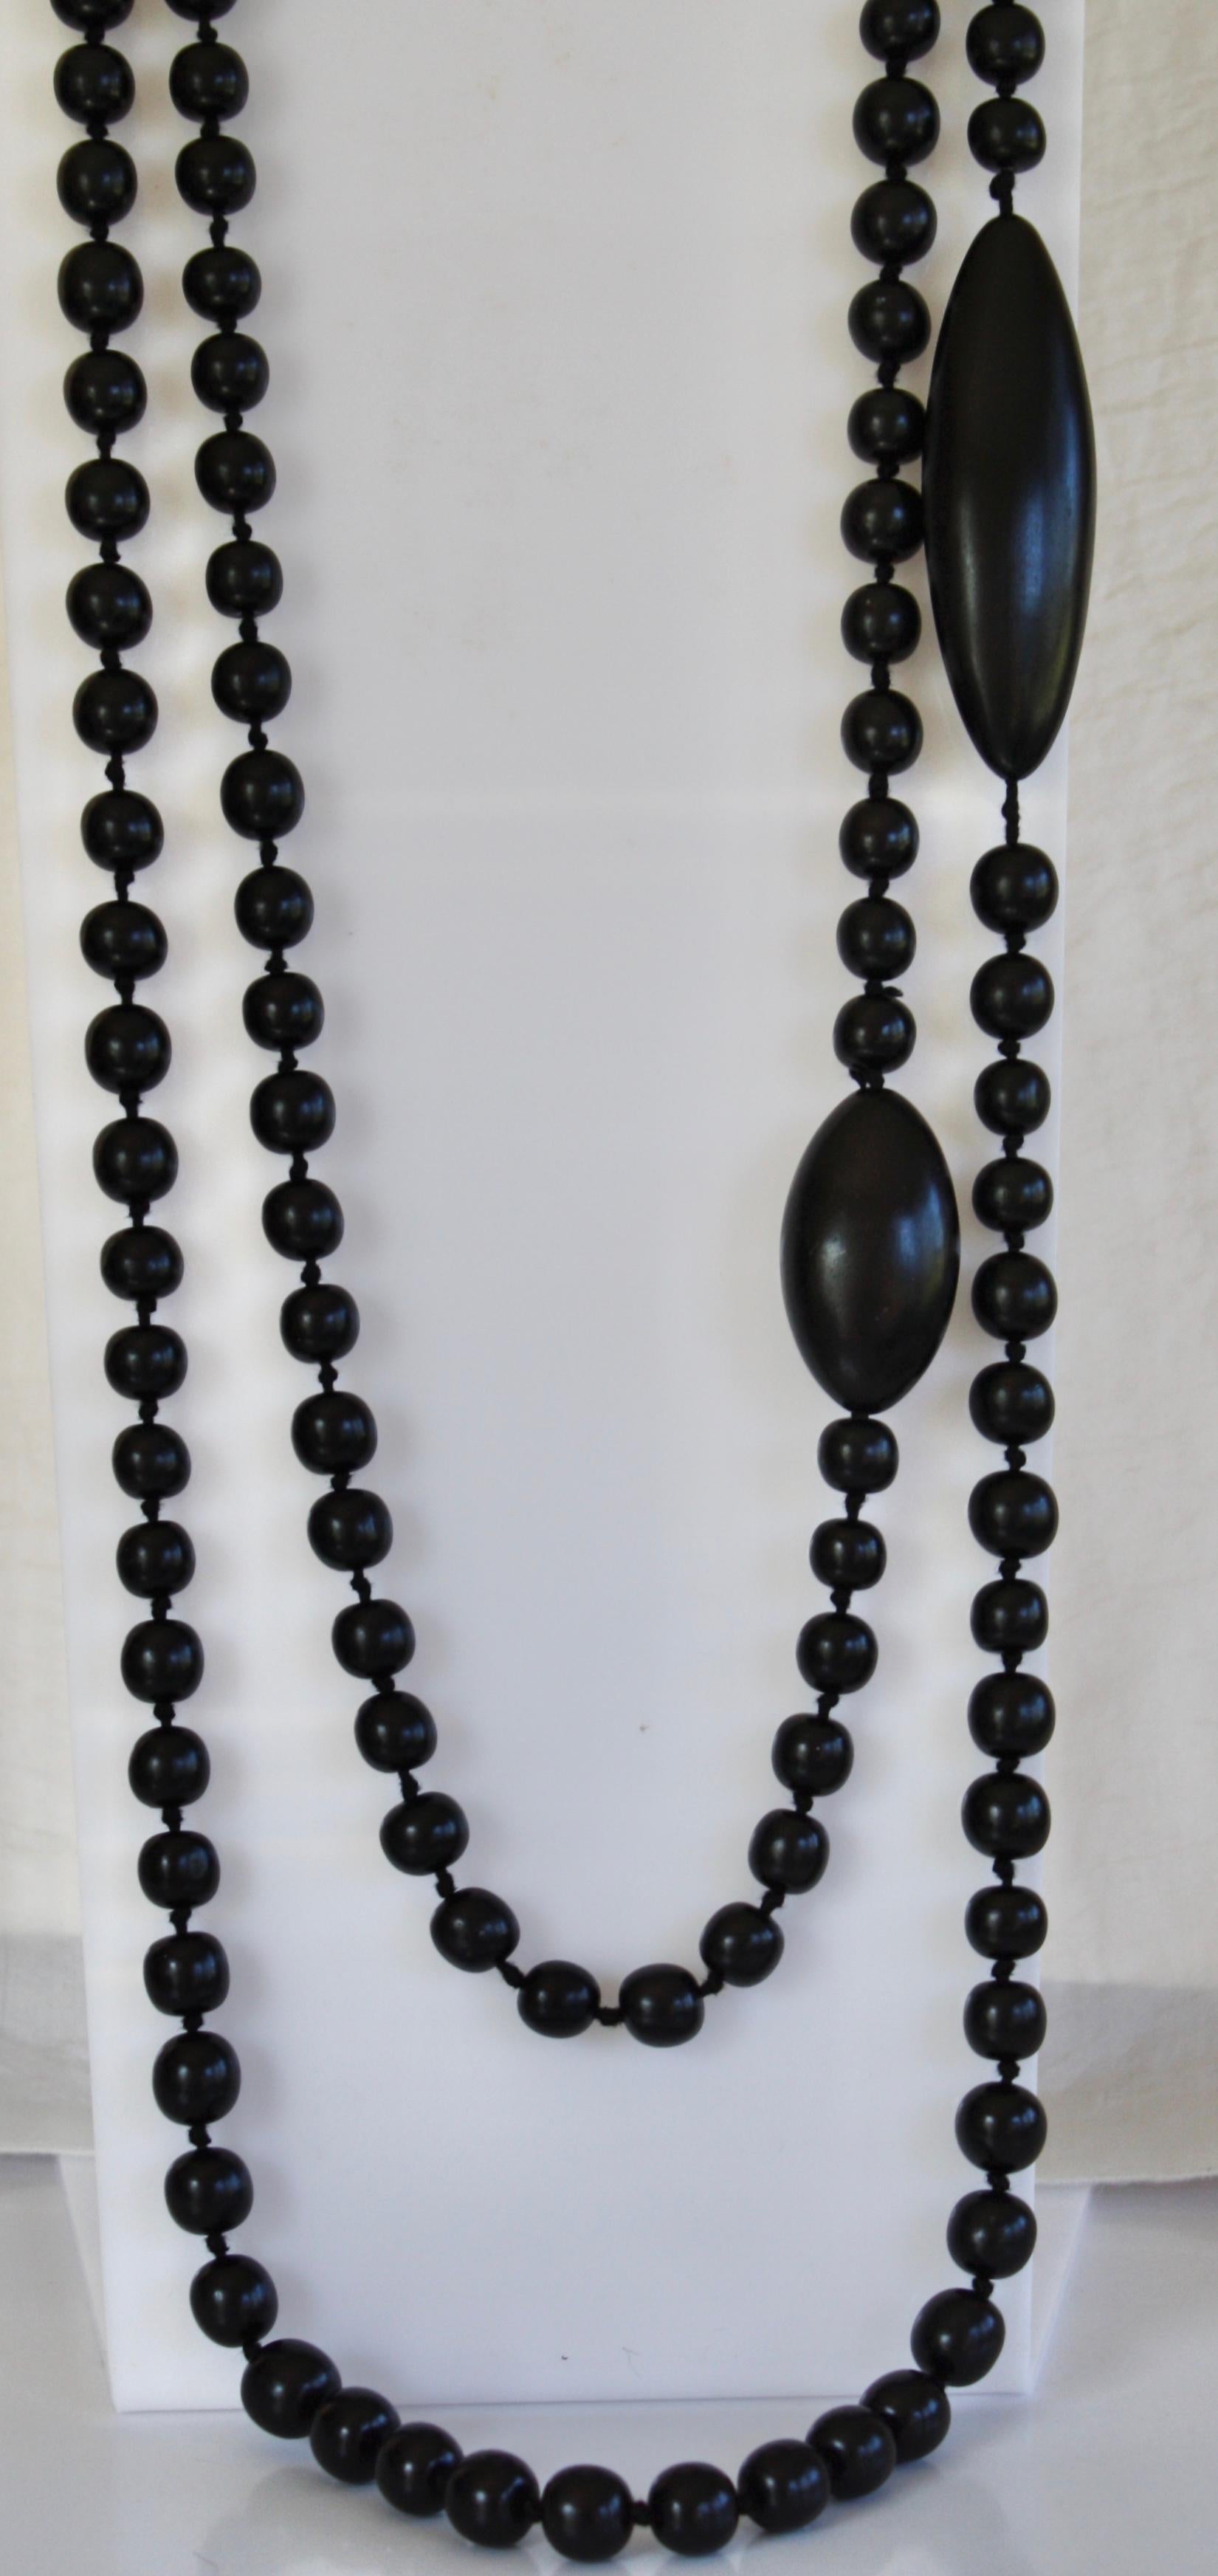 Long strand of ebony wood beads can be wrapped around multiple times to create layered effect. Made by Monies Denmark.